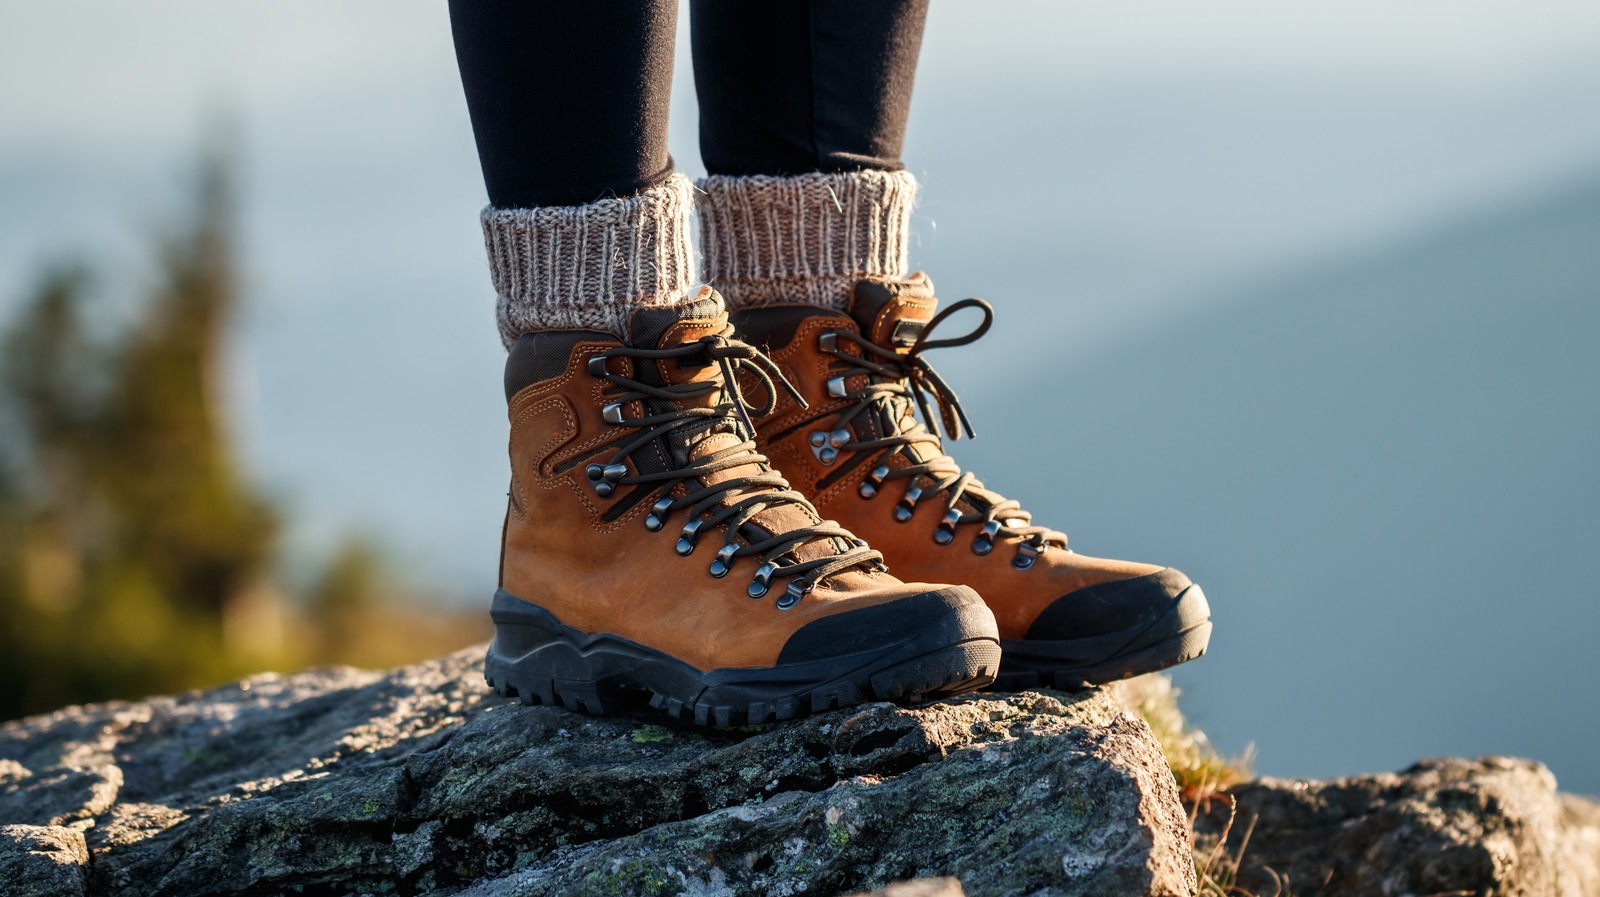 The Simple Trick For Preventing Blisters On Your Next Hike